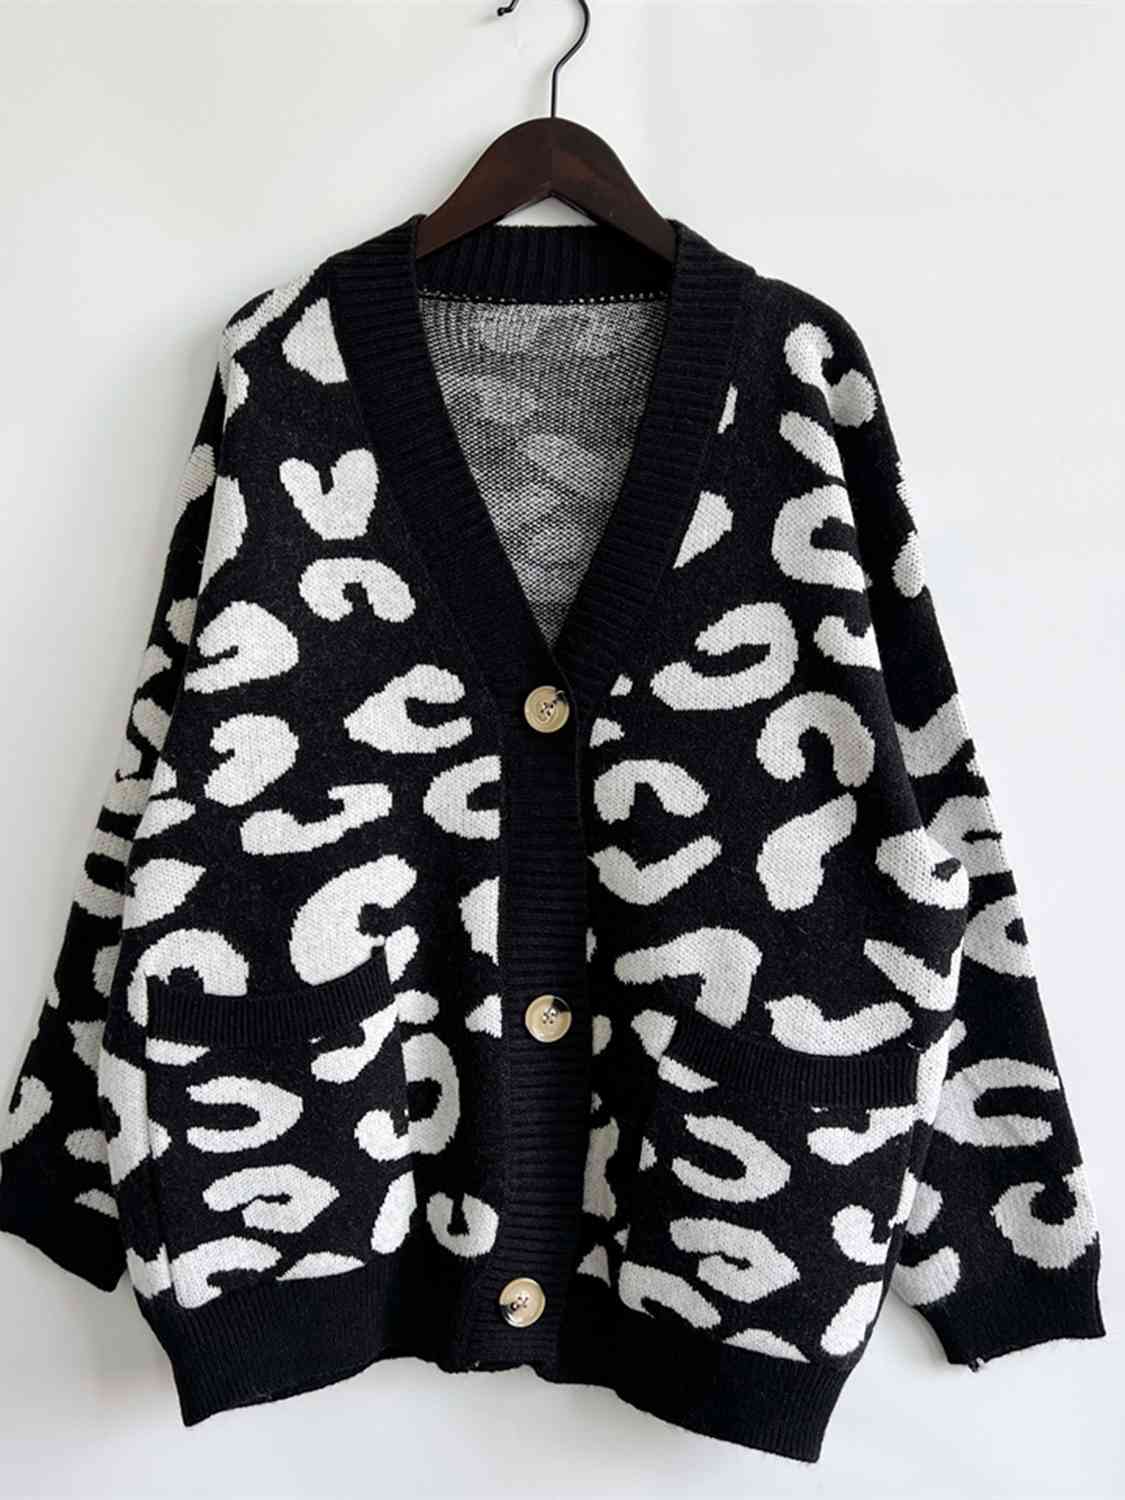 Leopard Button Front Cardigan with Pockets